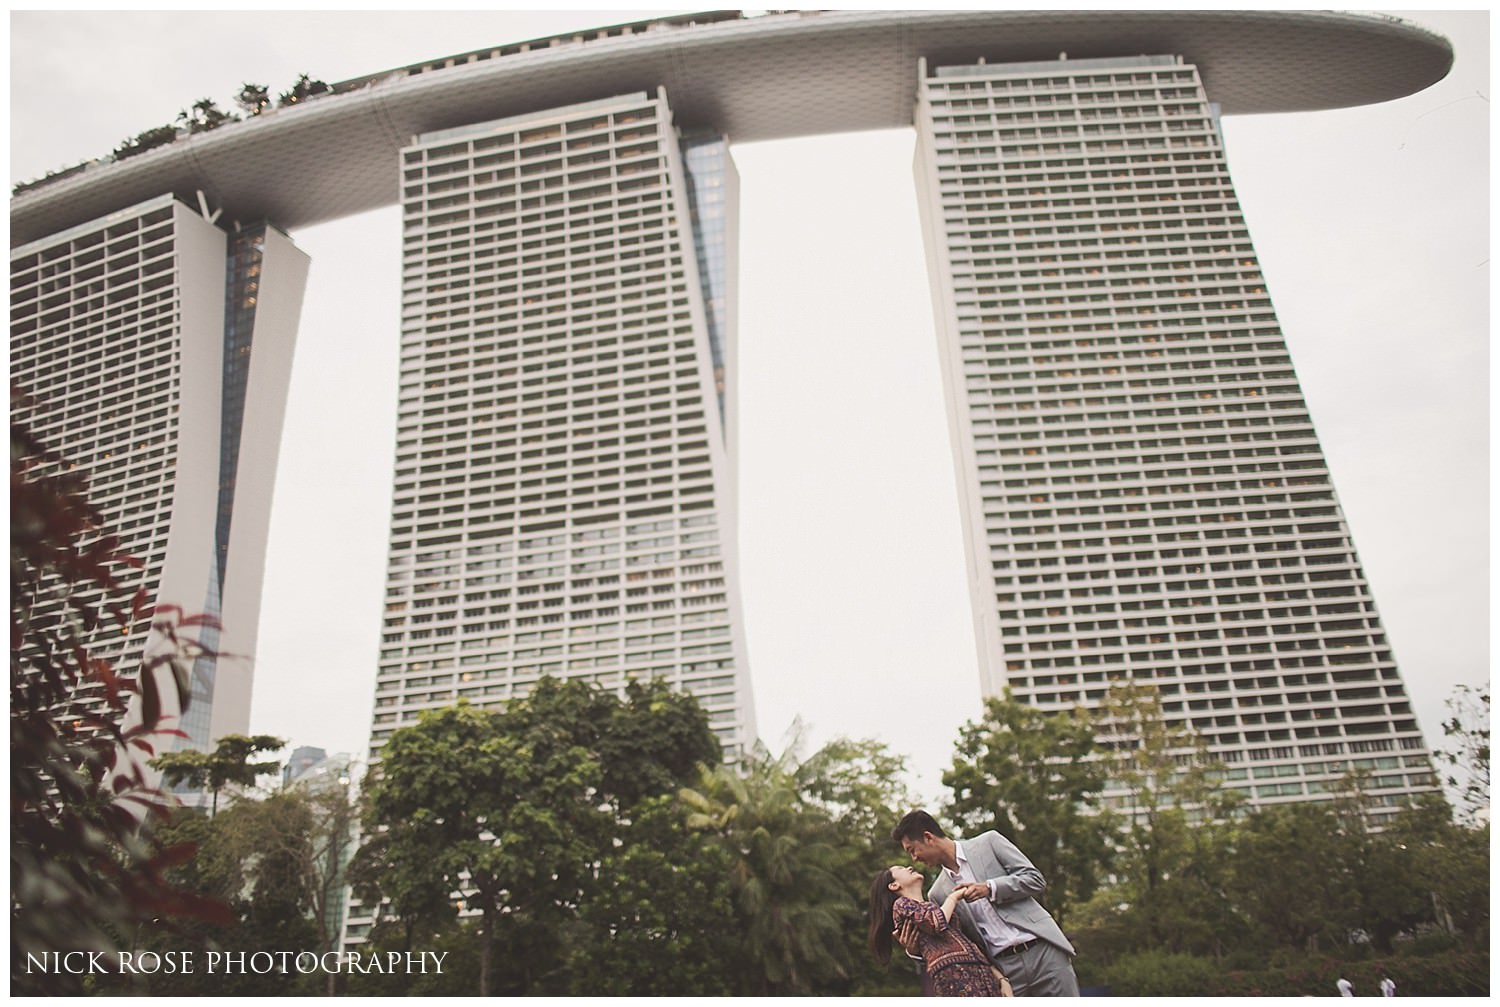  Couple pre wedding photography image taken at the Marina Bay Sands Hotel in Singapore 